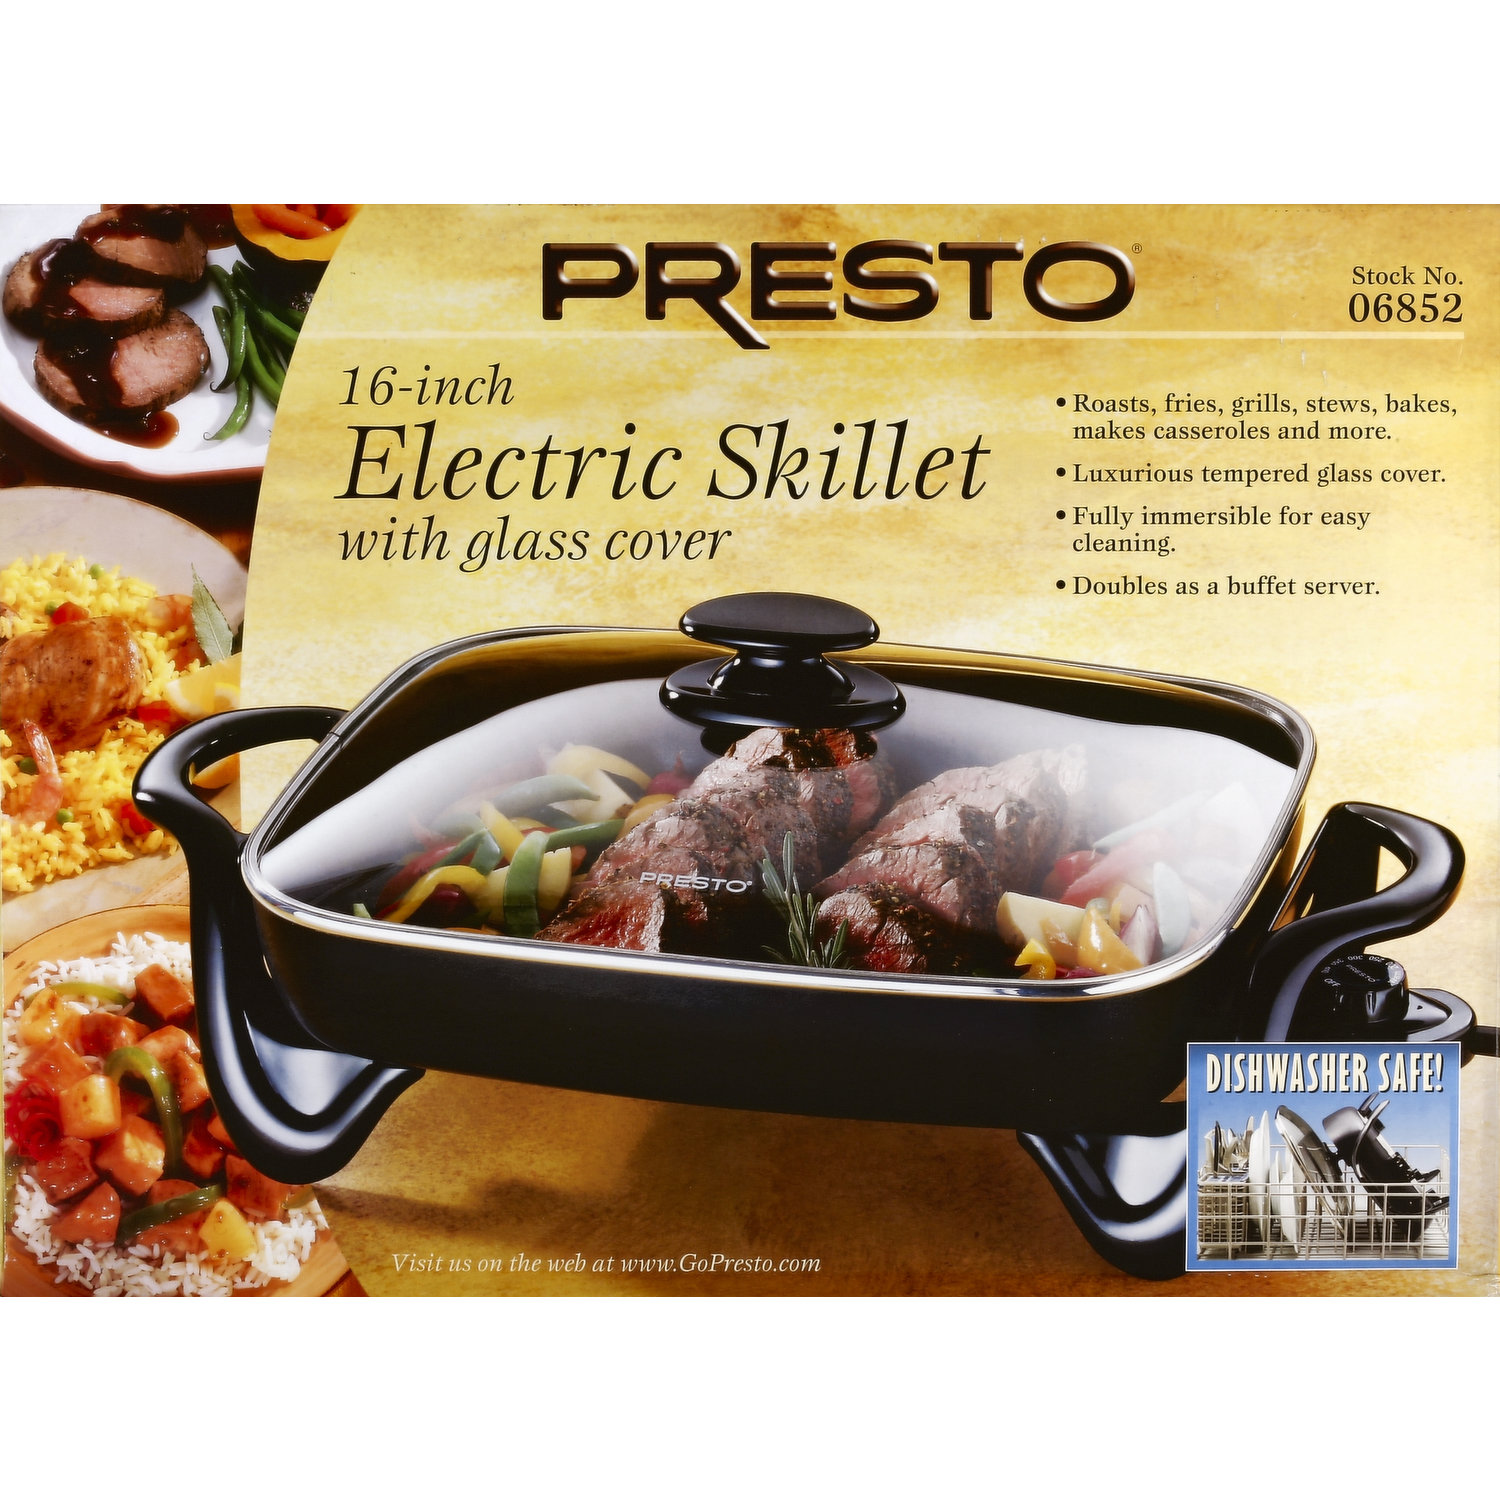 16-inch Electric Skillet with glass cover - Skillets - Presto®